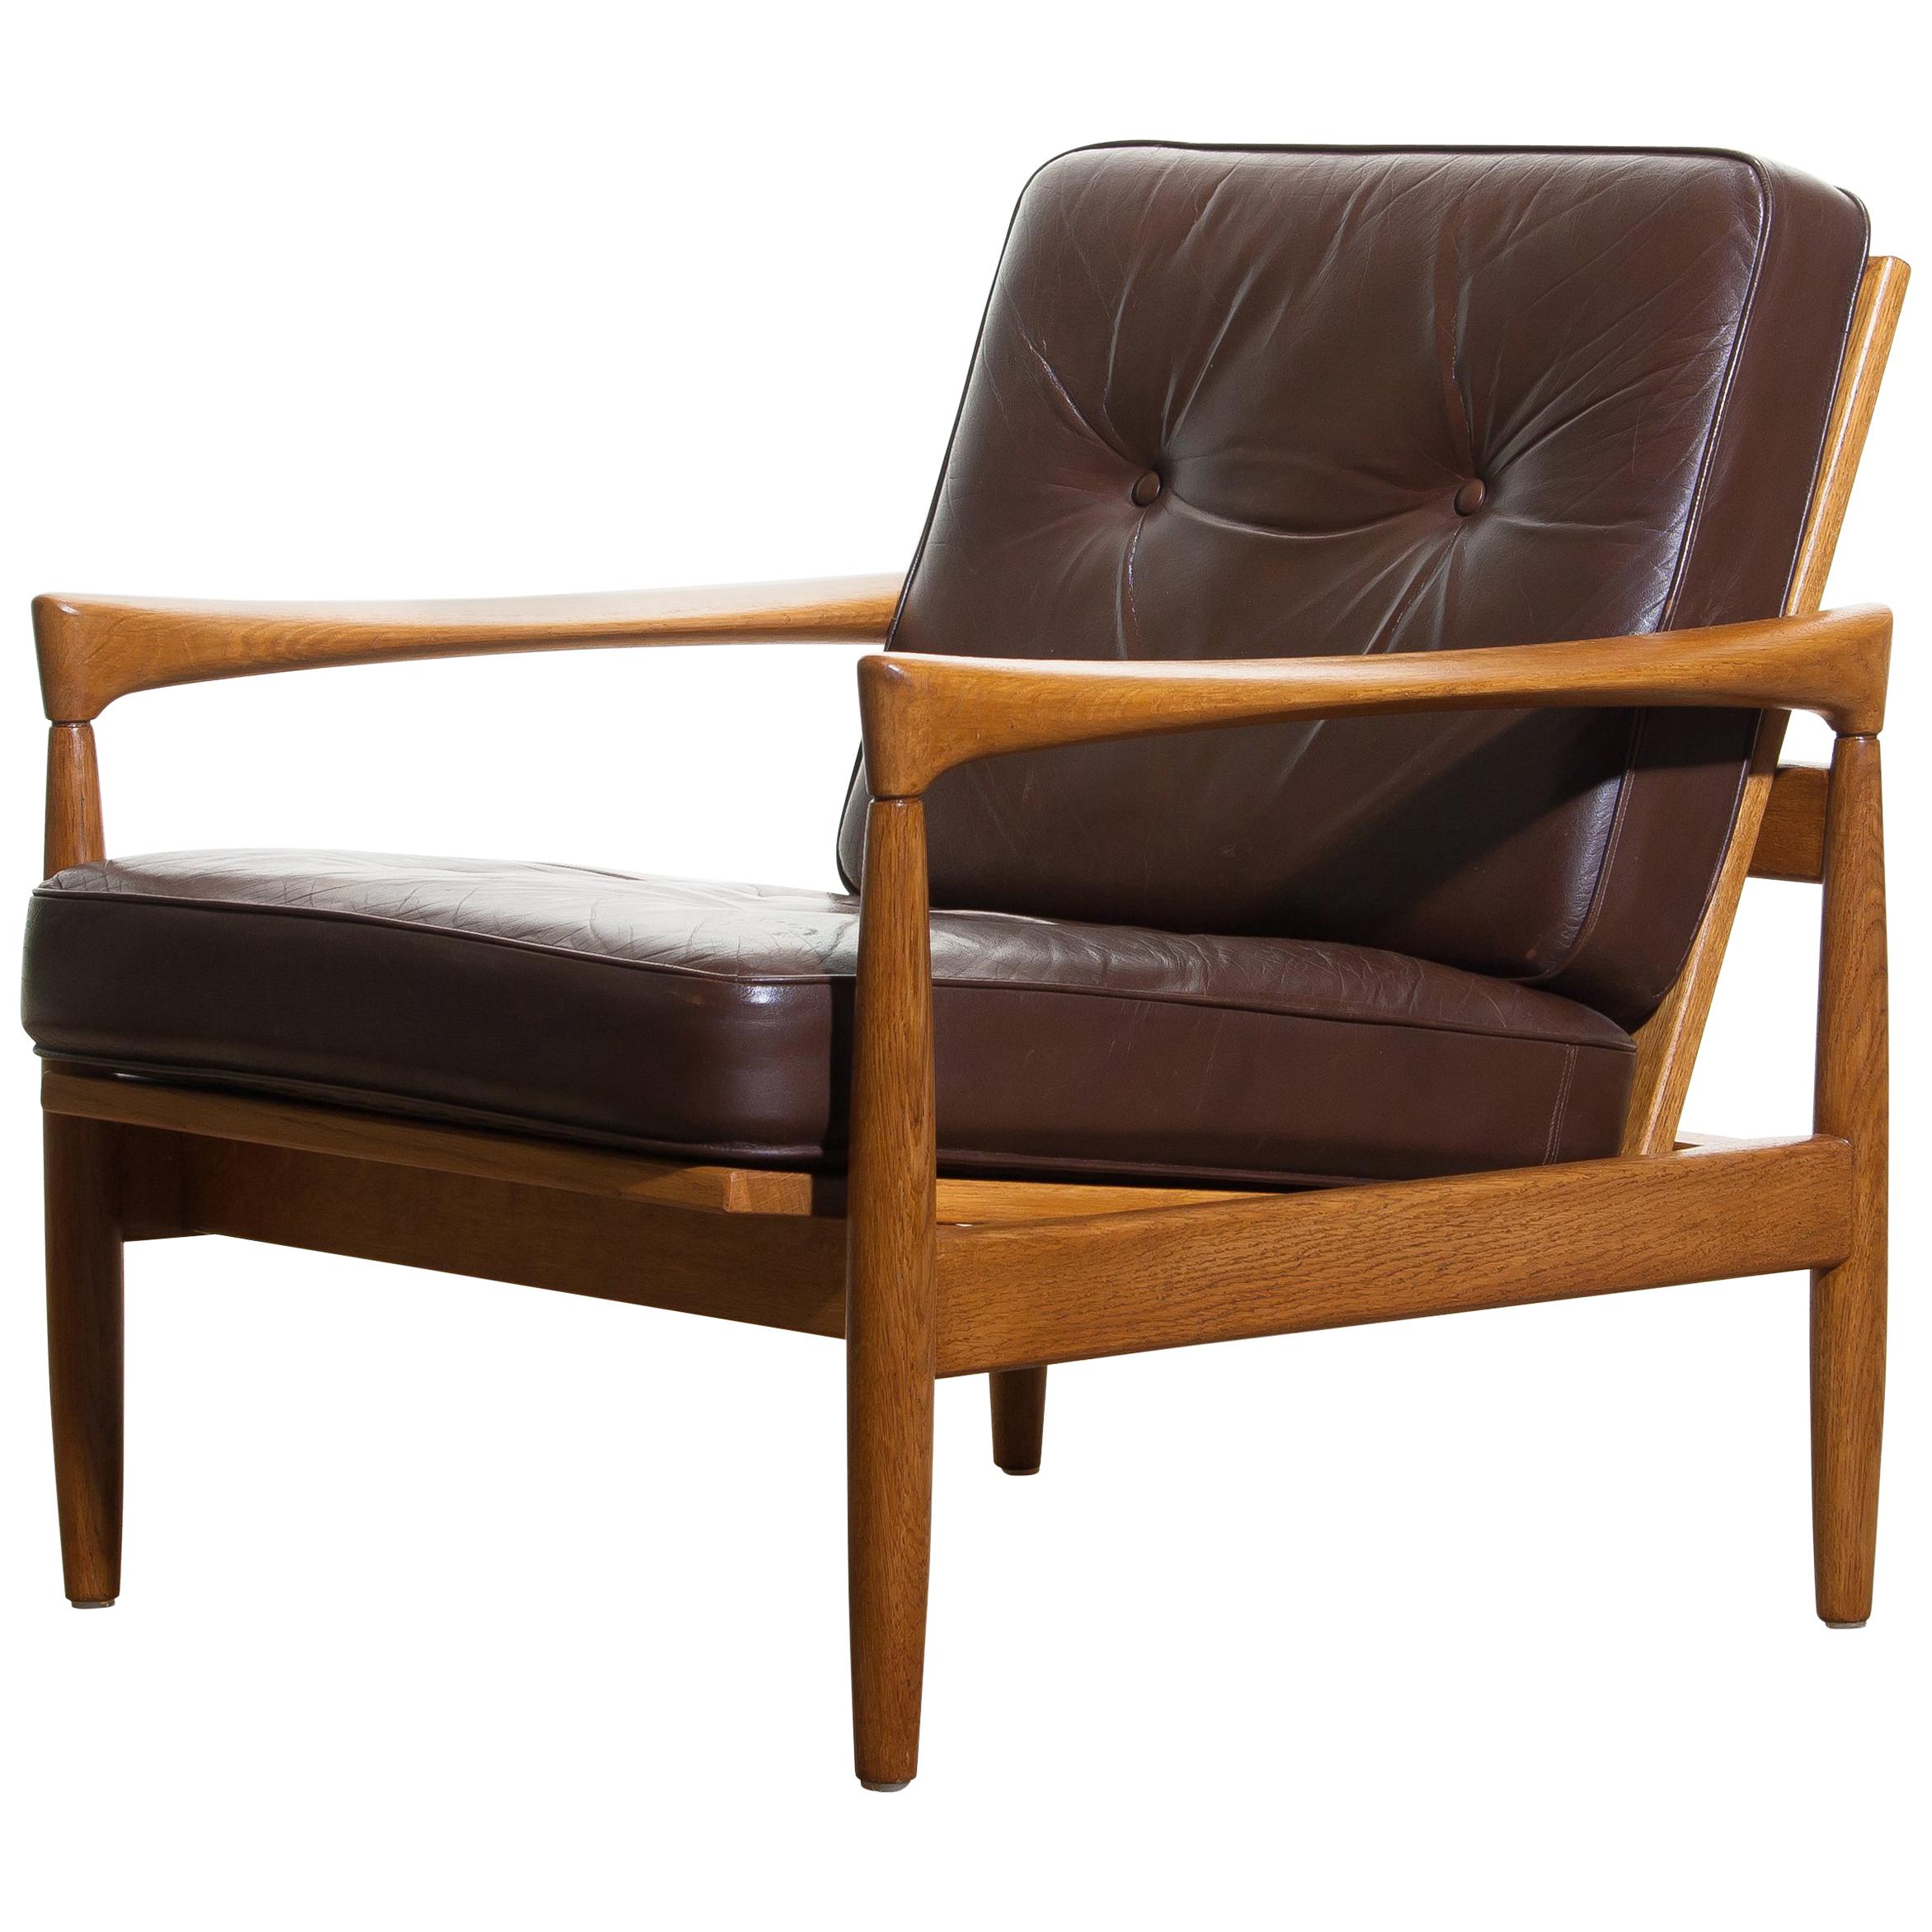 Swedish 1960s, Oak and Brown Leather Lounge Chair by Erik Wörtz for Broderna Anderssons